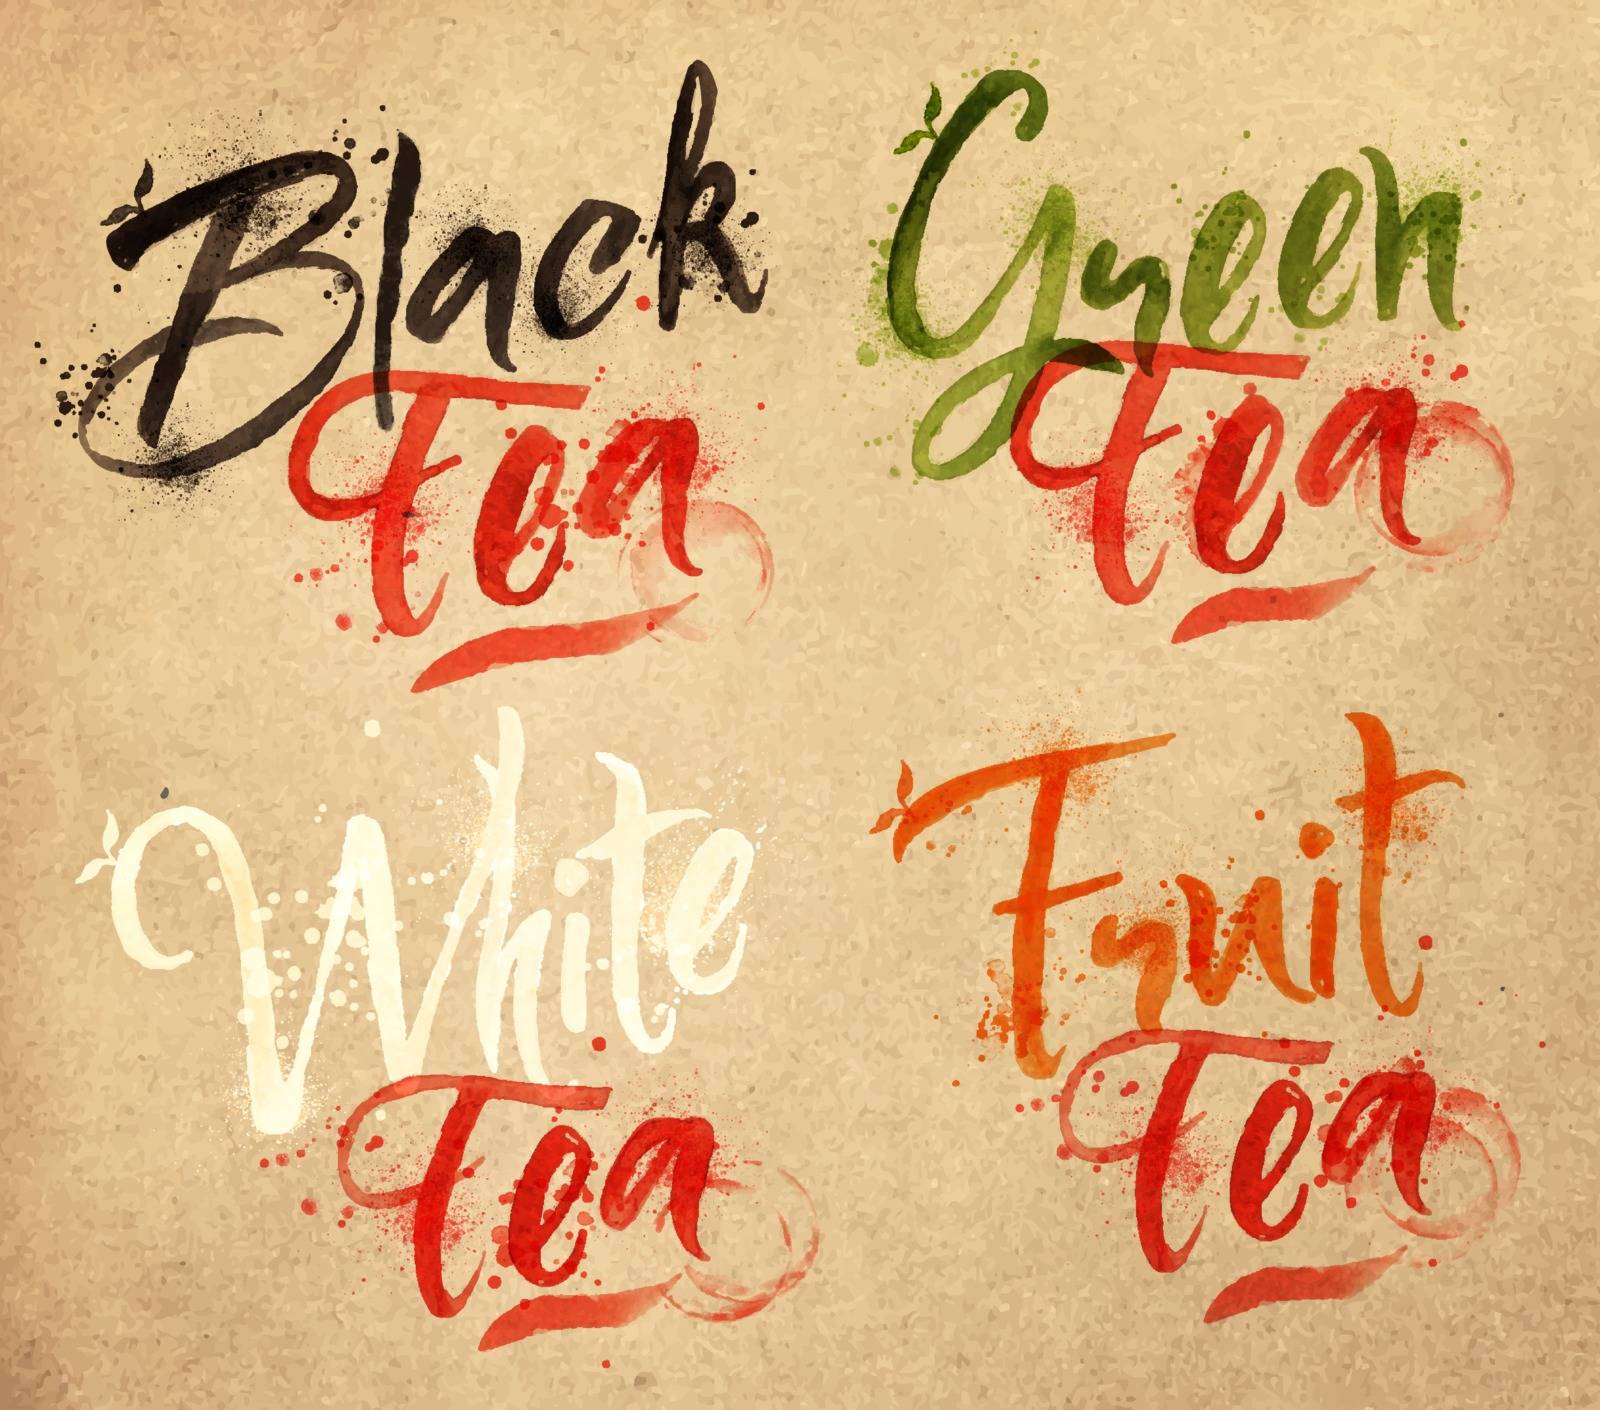 Drawn names of different kinds of tea, black, green, white, fruit drops of tea on kraft paper